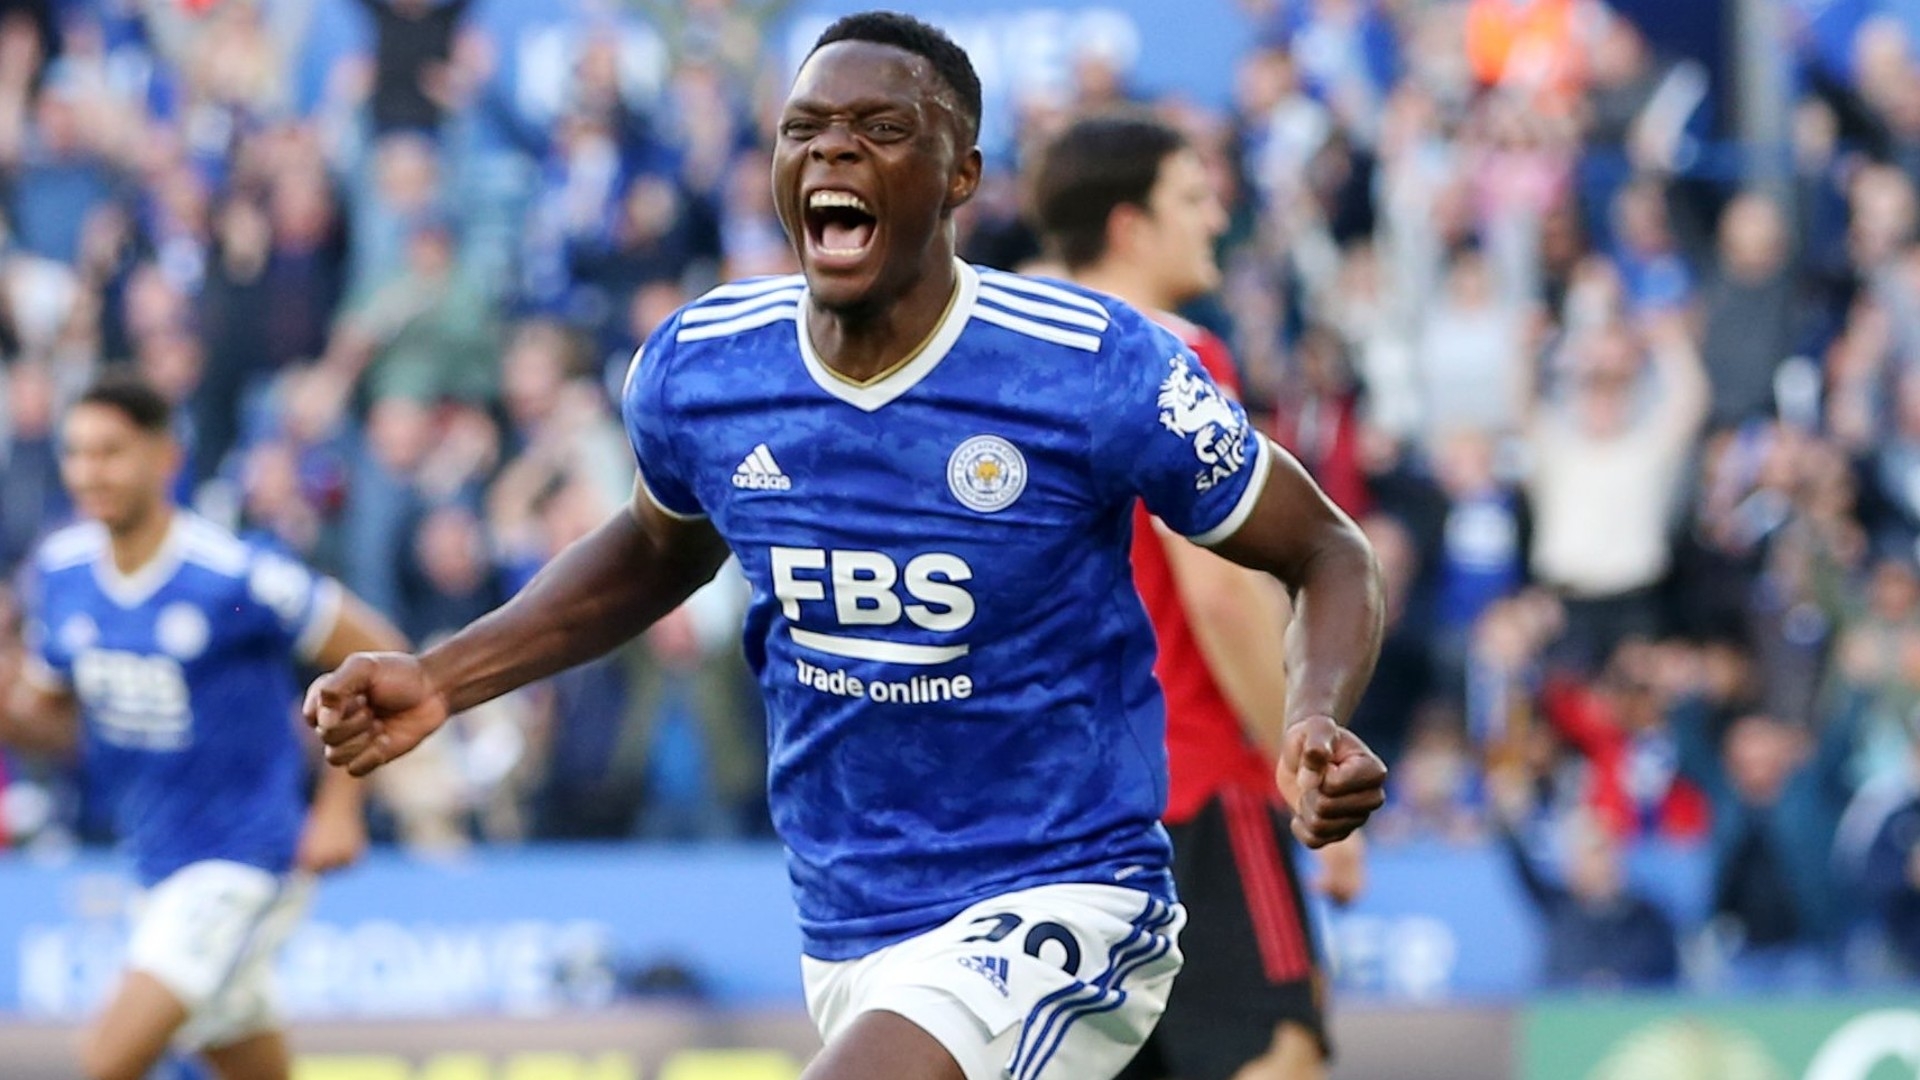 Leicester City's Patson Daka just has to put 'icing on the cake' after goal against Legia Warsaw | Goal.com